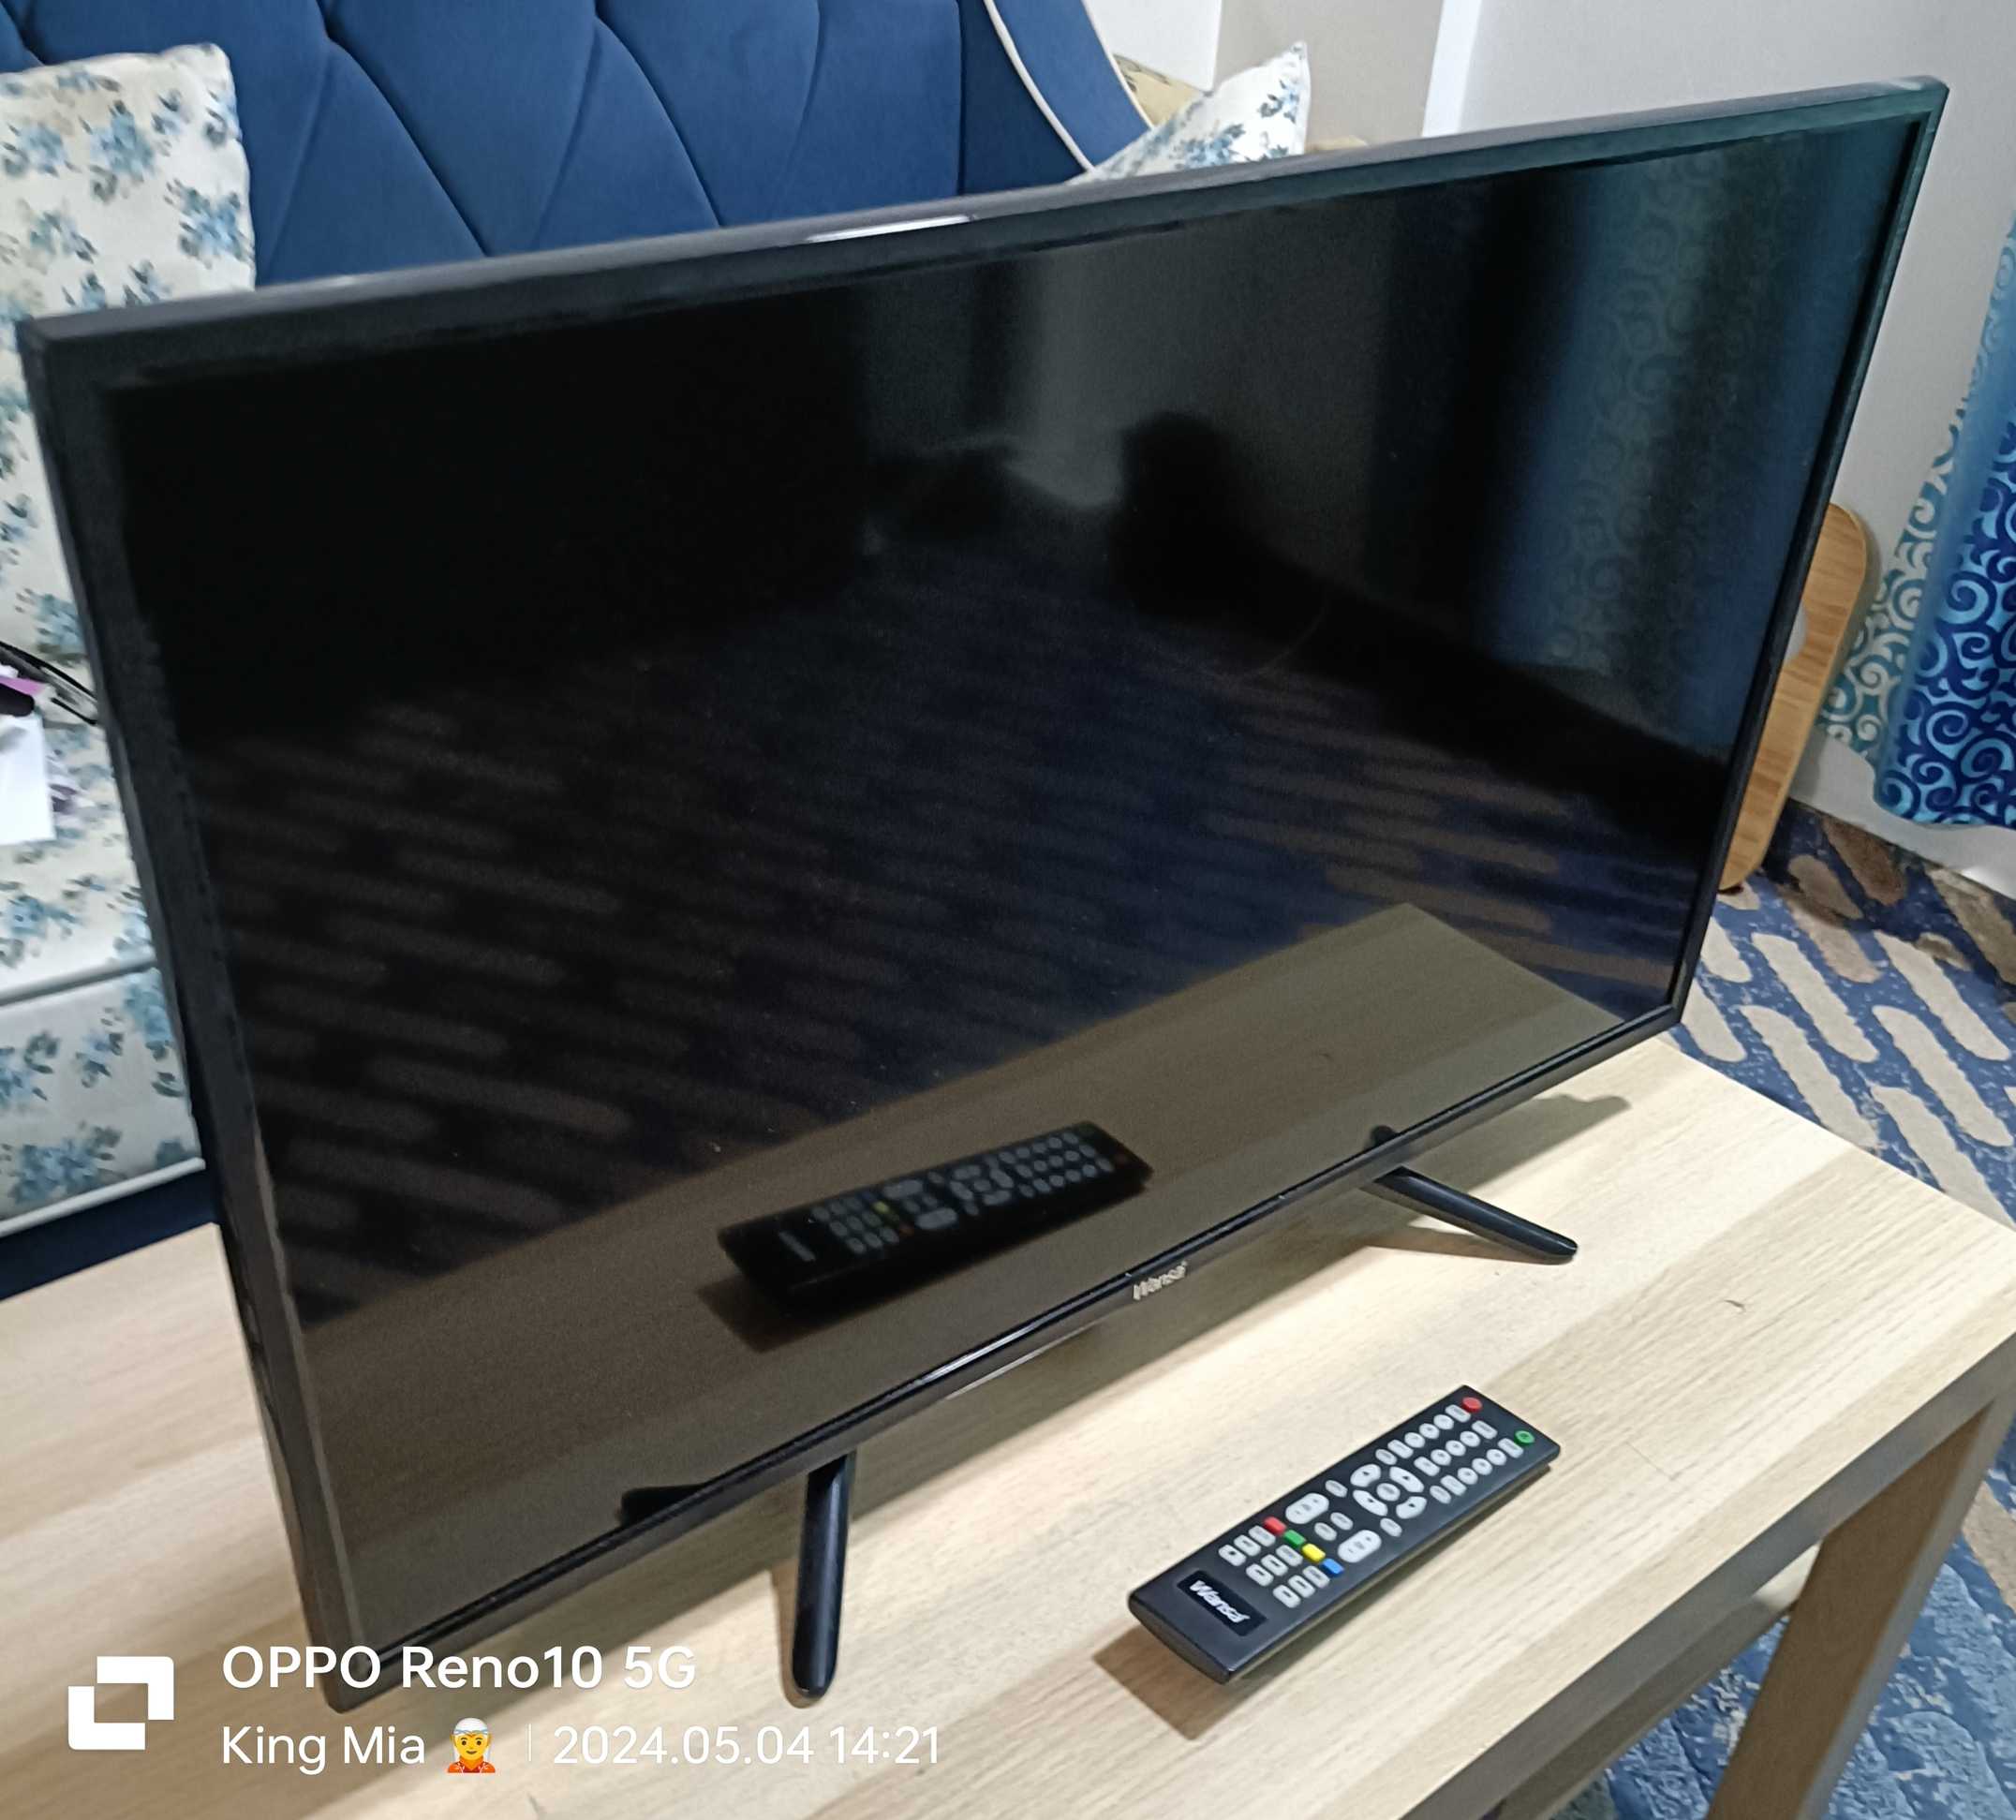 Wansa LED 32" with Remote control for Sale in brand new condition. 